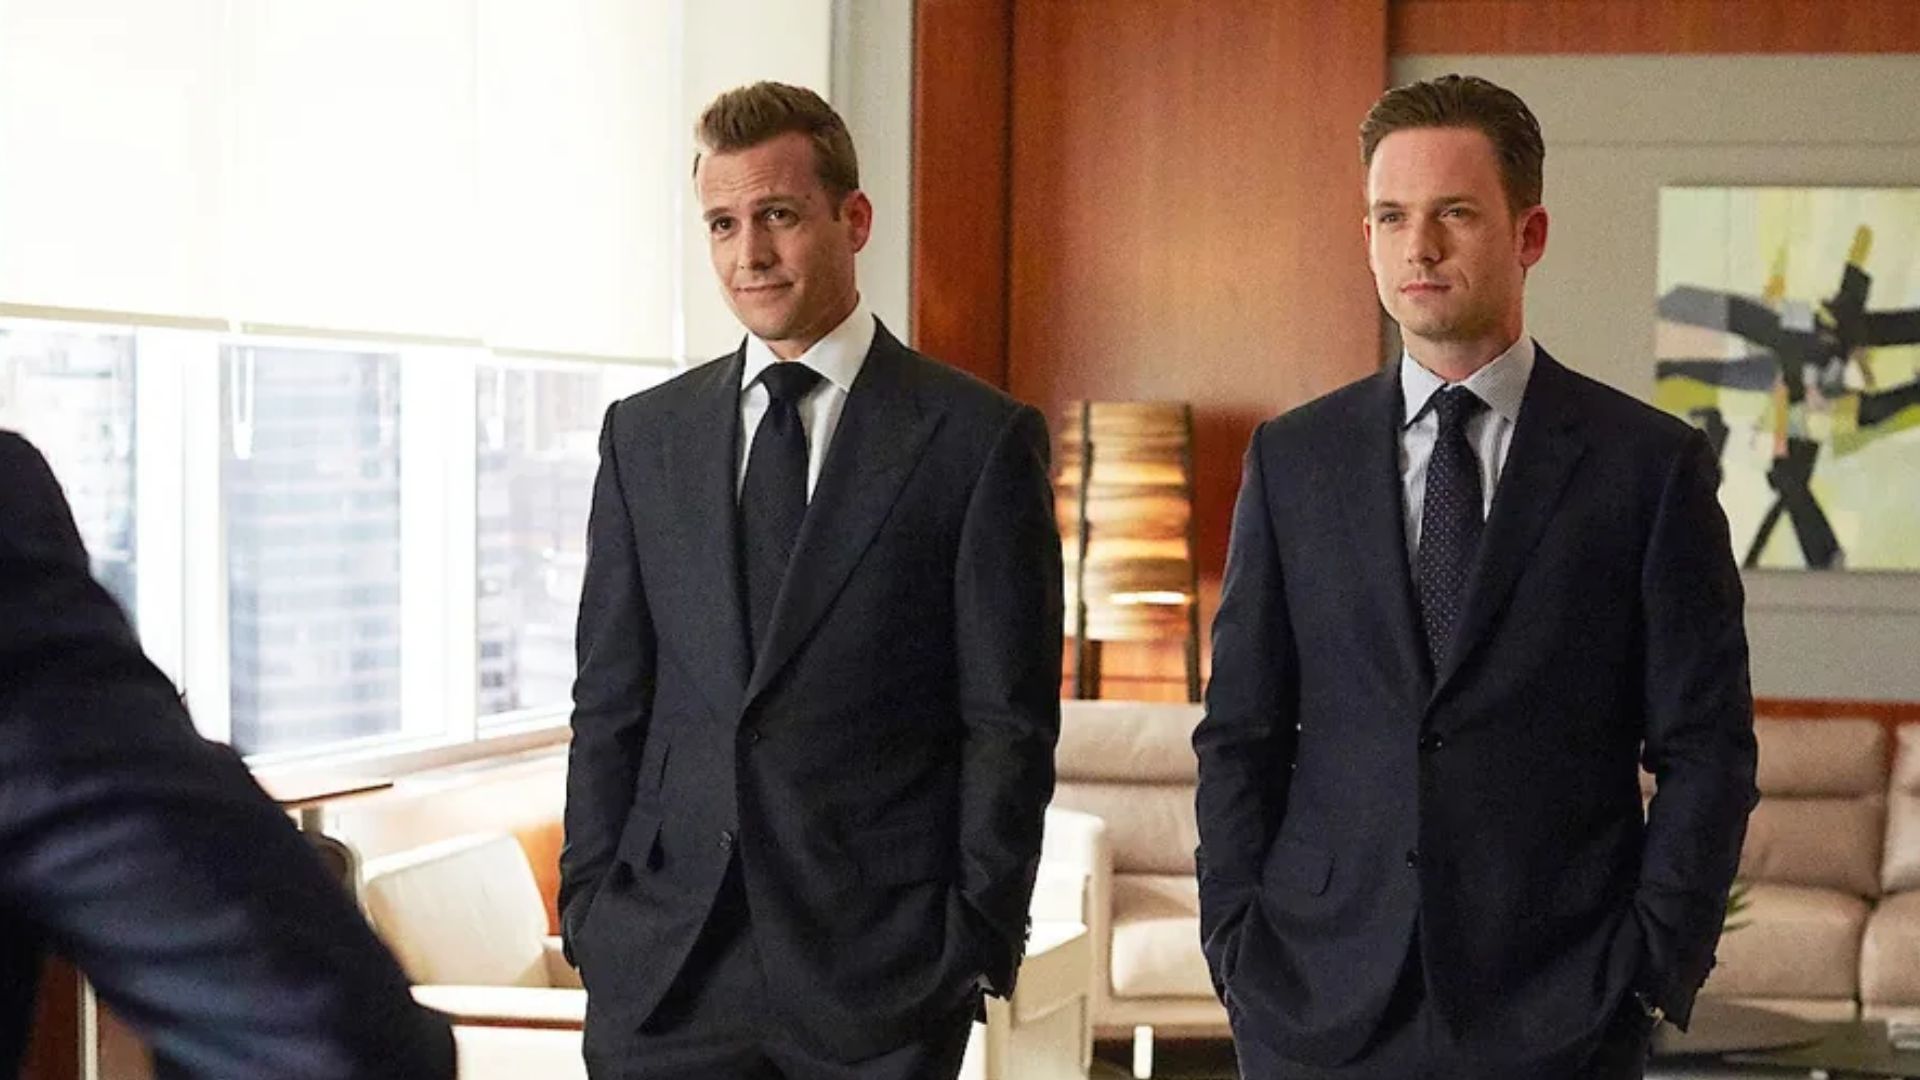 Stephen Amell to headline 'Suits' spinoff, 'Suits LA' TheDailyGuardian